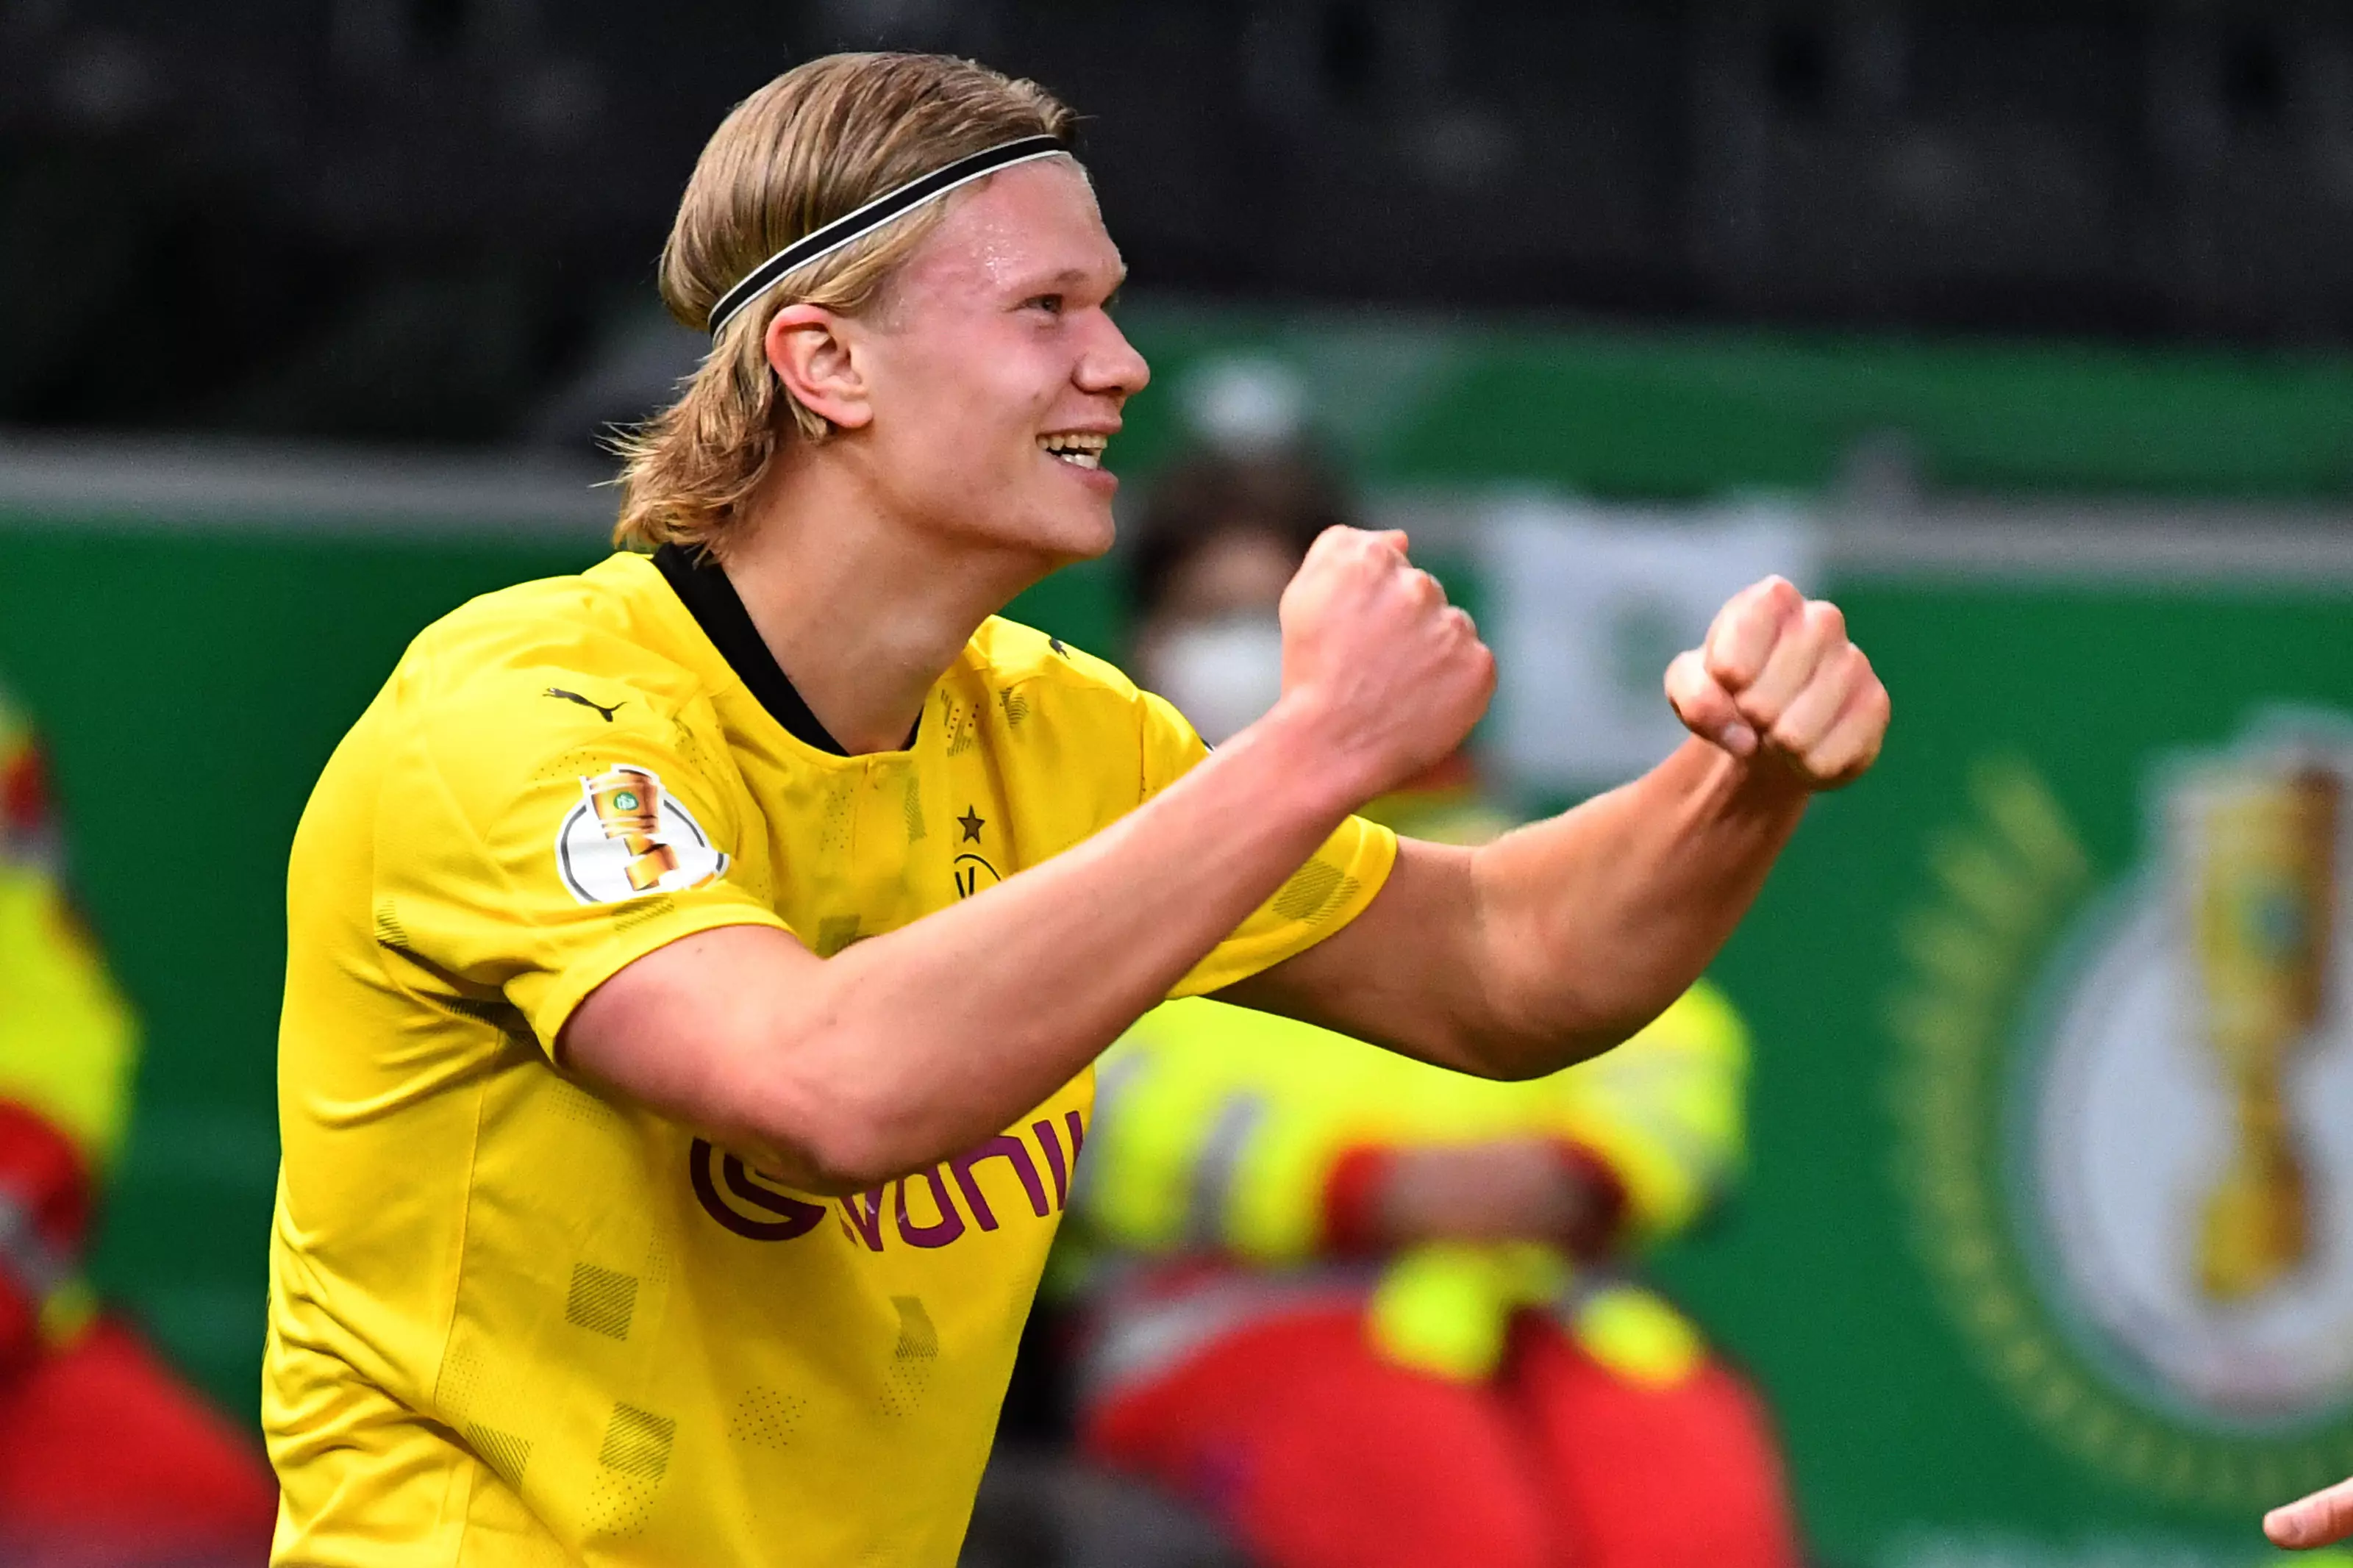 Erling Haaland has found the back of the net 49 times inside 52 games for Borussia Dortmund